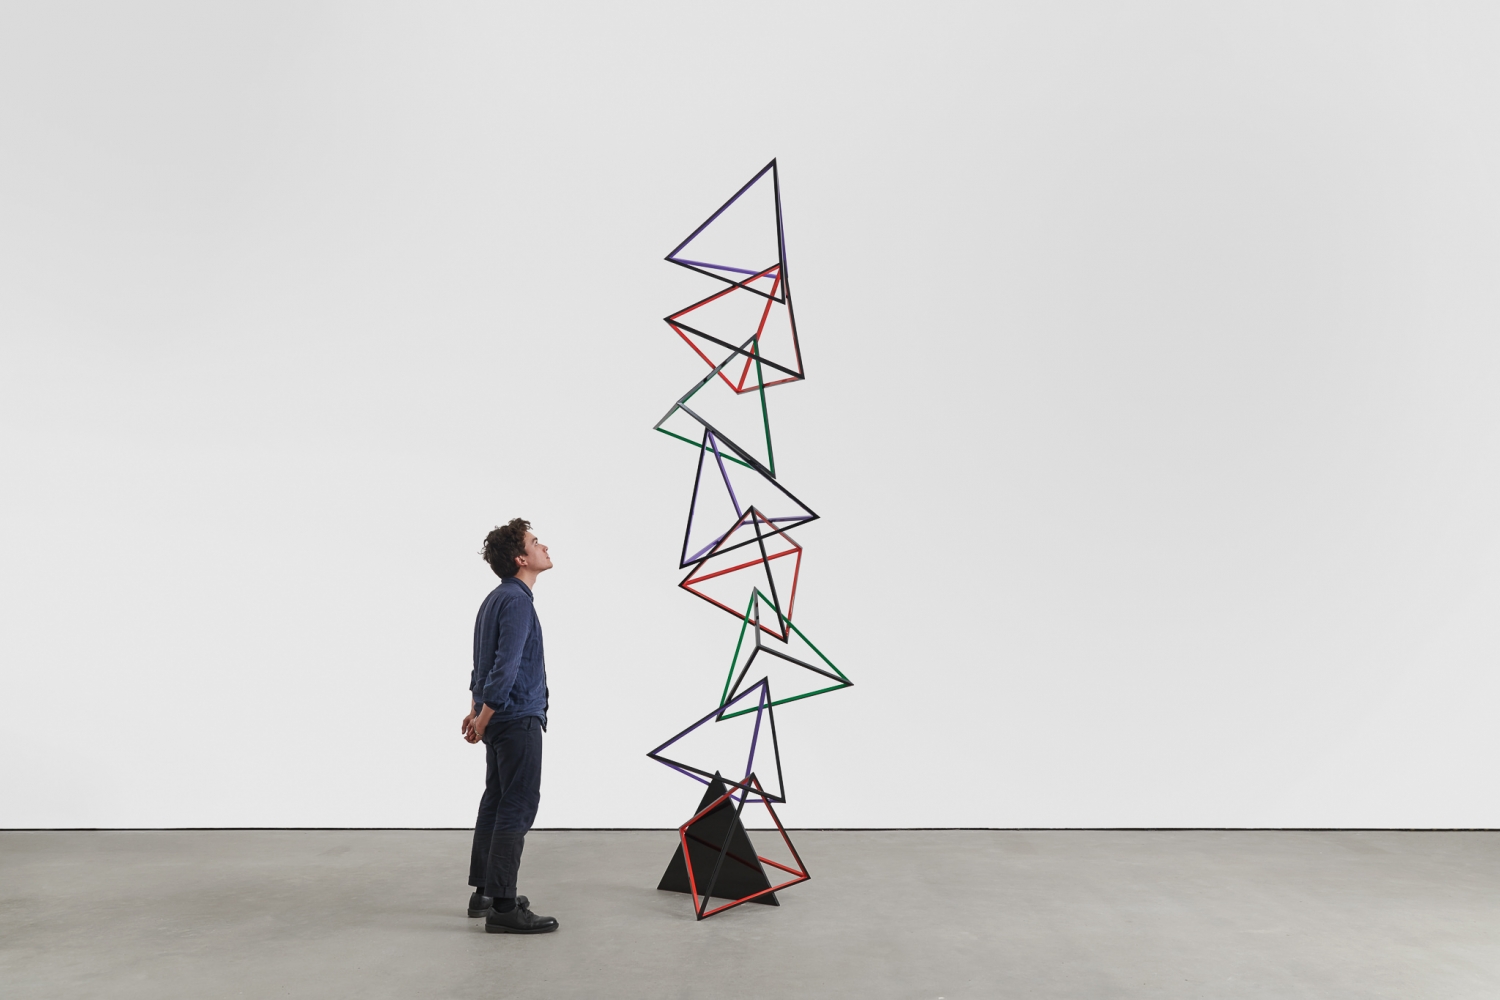 Eva Rothschild

Hi-Wire

2019

Stainless steel, paint

135 7/8 x 41 x 44 1/2 inches (345 x 104 x 113 cm)

Edition of 3, with 2 AP

ER 219

&amp;pound;70,000

&amp;nbsp;

INQUIRE